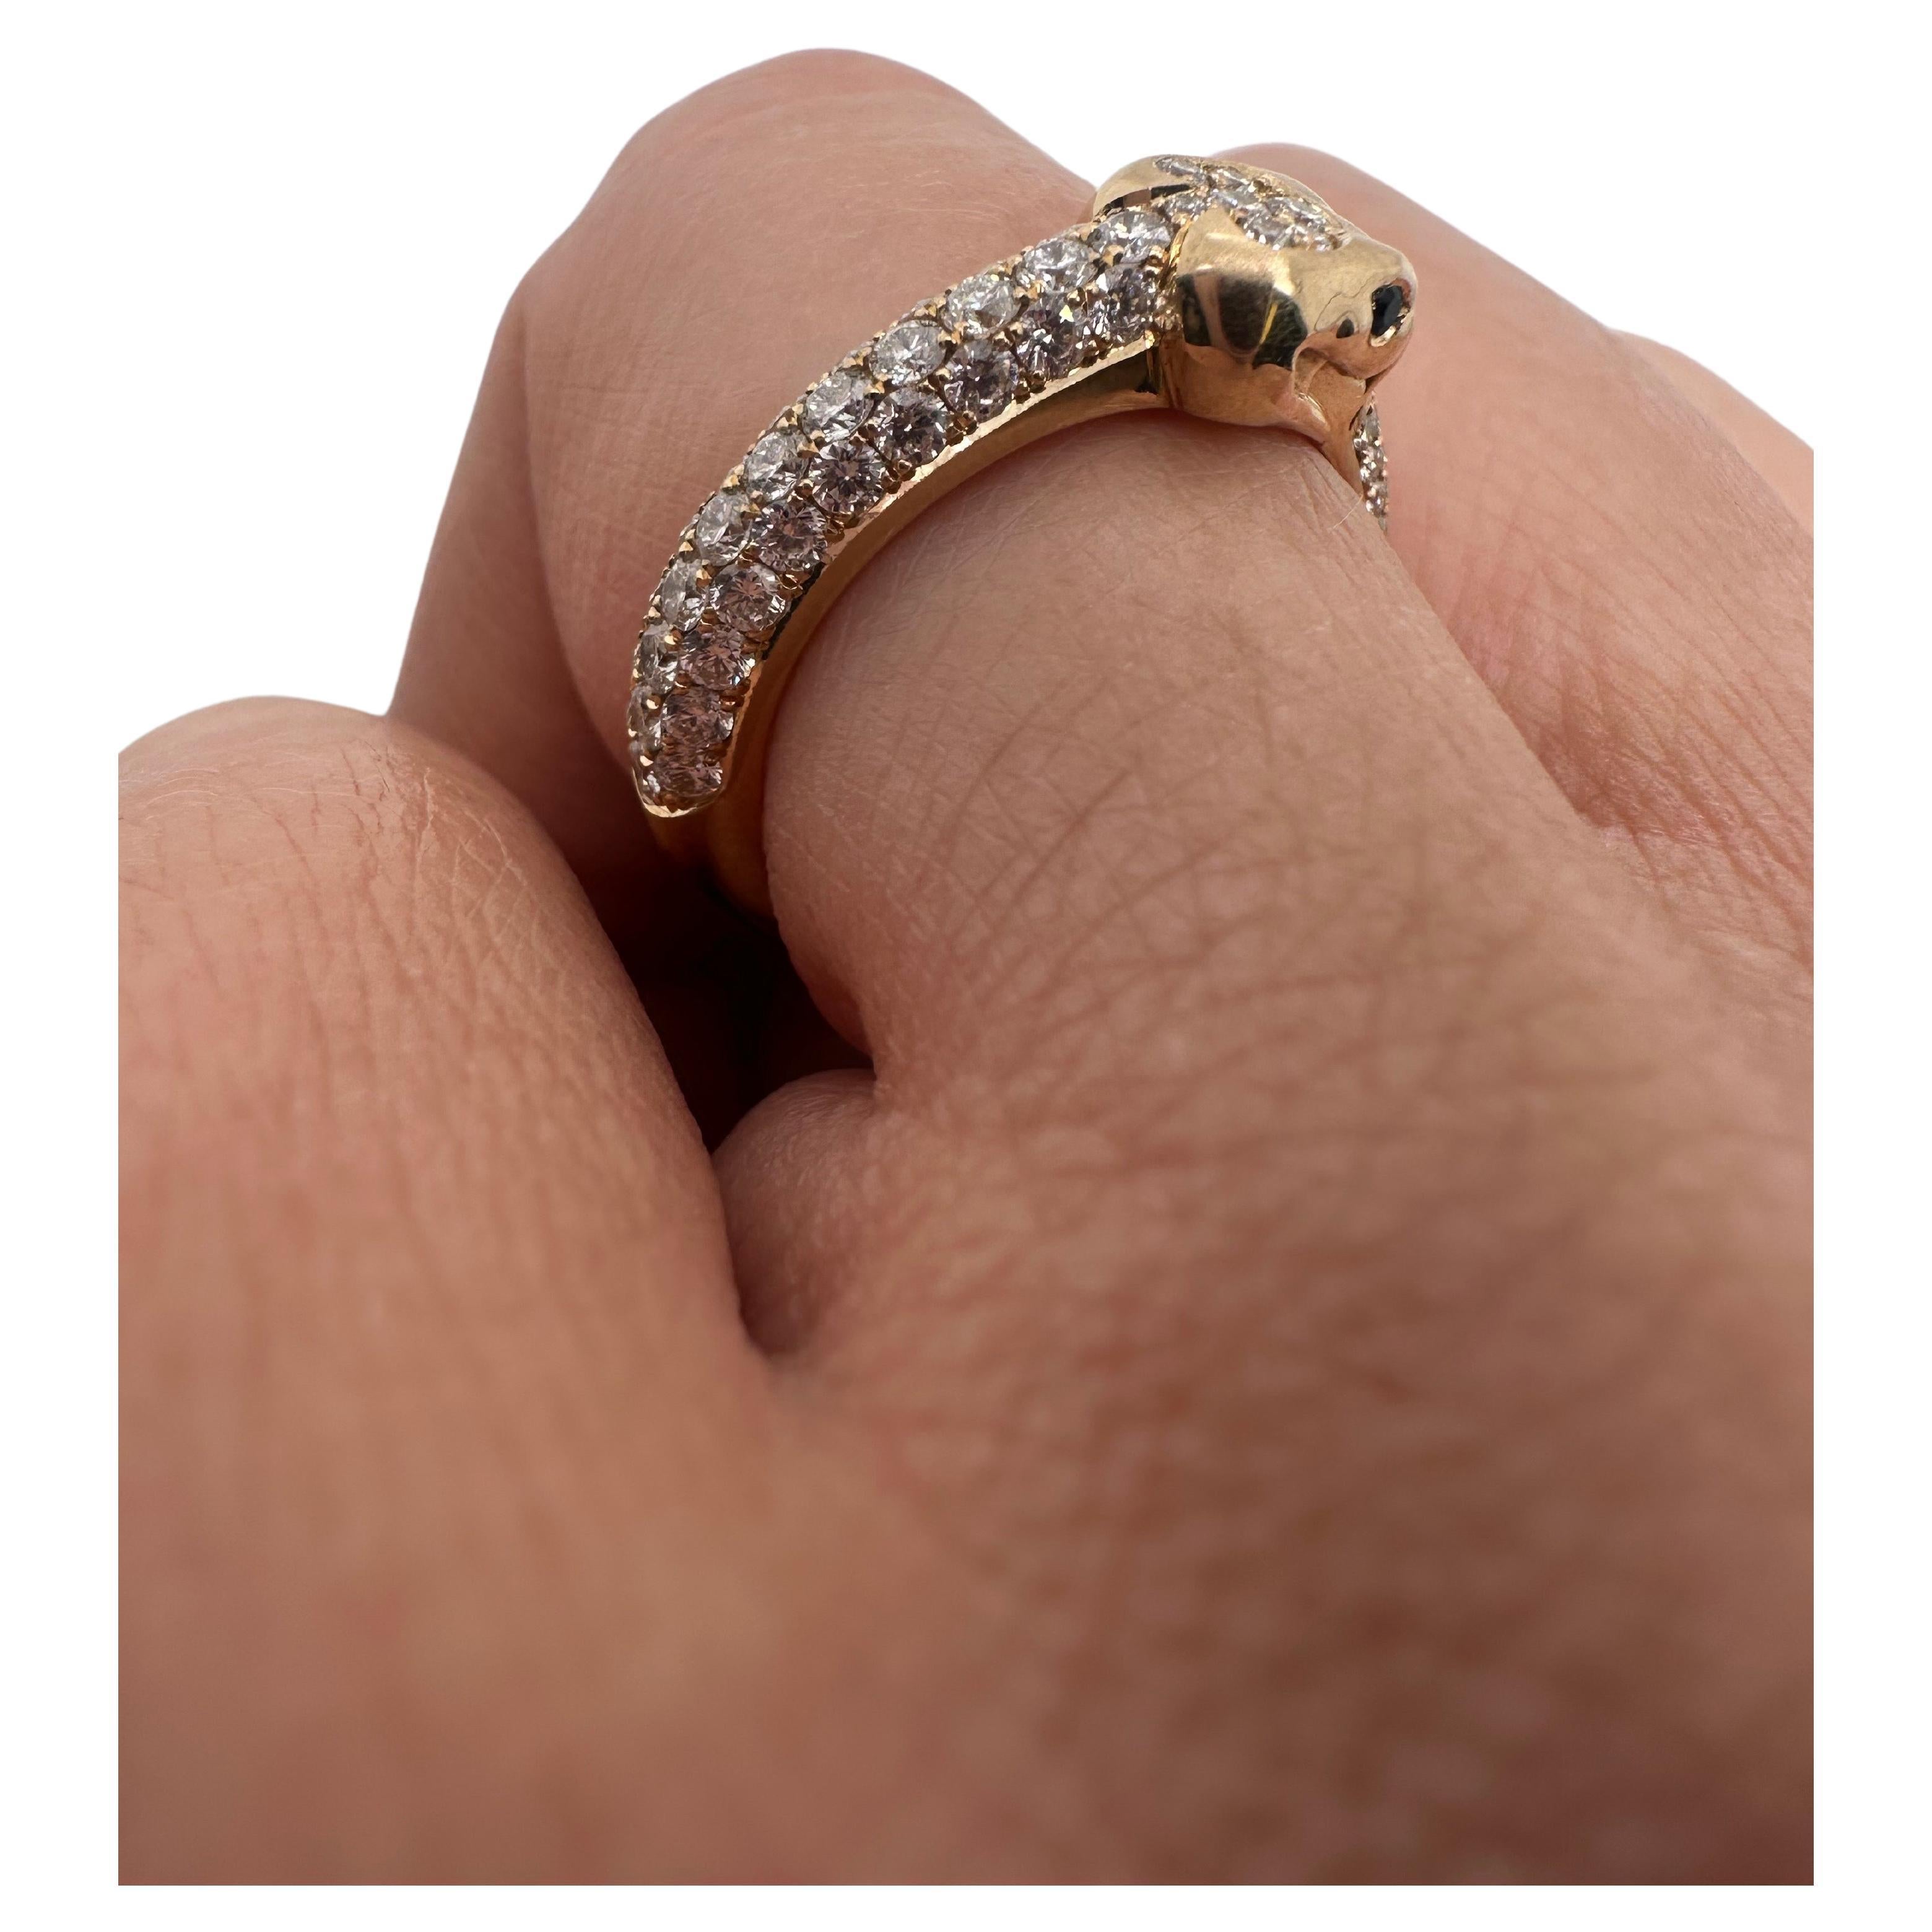 Fantastic craftsmanship on this ring, made by hand from scratch with stunning snake design and natural white diamonds in 18KT yellow gold.

Metal Type: 18KT

Natural Diamond(s): 
Color: F-G-H
Cut:Round Brilliant
Carat: 1.10ct
Clarity: VS-SI